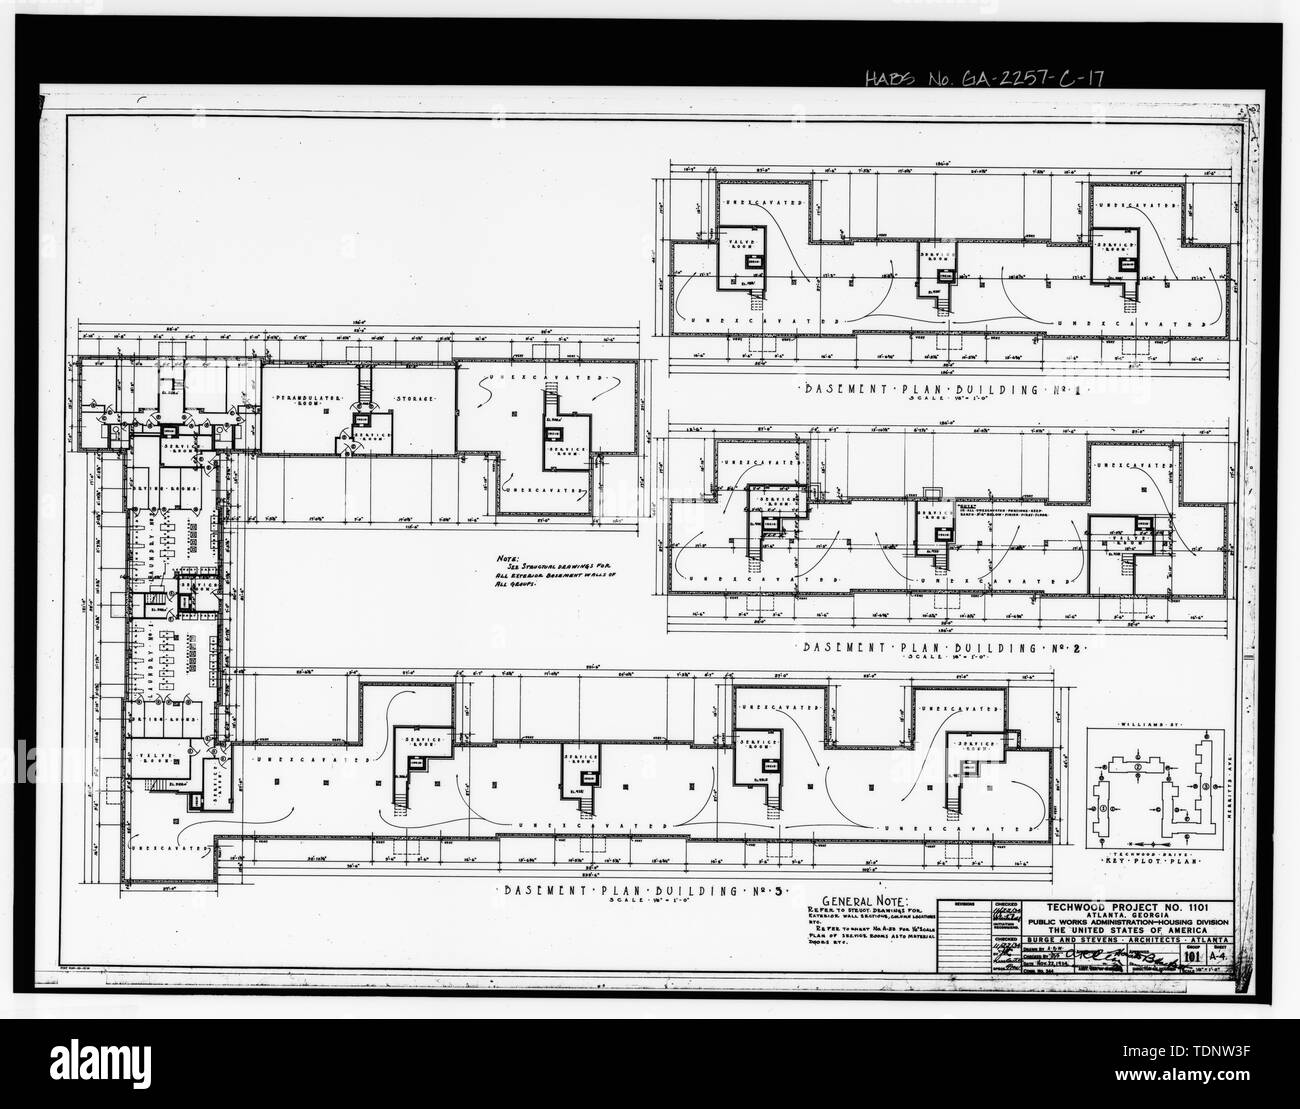 Photocopy of Drawing (November 1934 Architectural Drawings by Burge and Stevens, in Possession of the Engineering and Capital Improvements Department of the Atlanta Housing Authority, Atlanta, Georgia). BASEMENT PLANS, BUILDINGS 1,2, AND 3, TECHWOOD PROJECT -1101, SHEET A-4. - Techwood Homes, Building No. 1, 575-579 Techwood Drive, Atlanta, Fulton County, GA Stock Photo